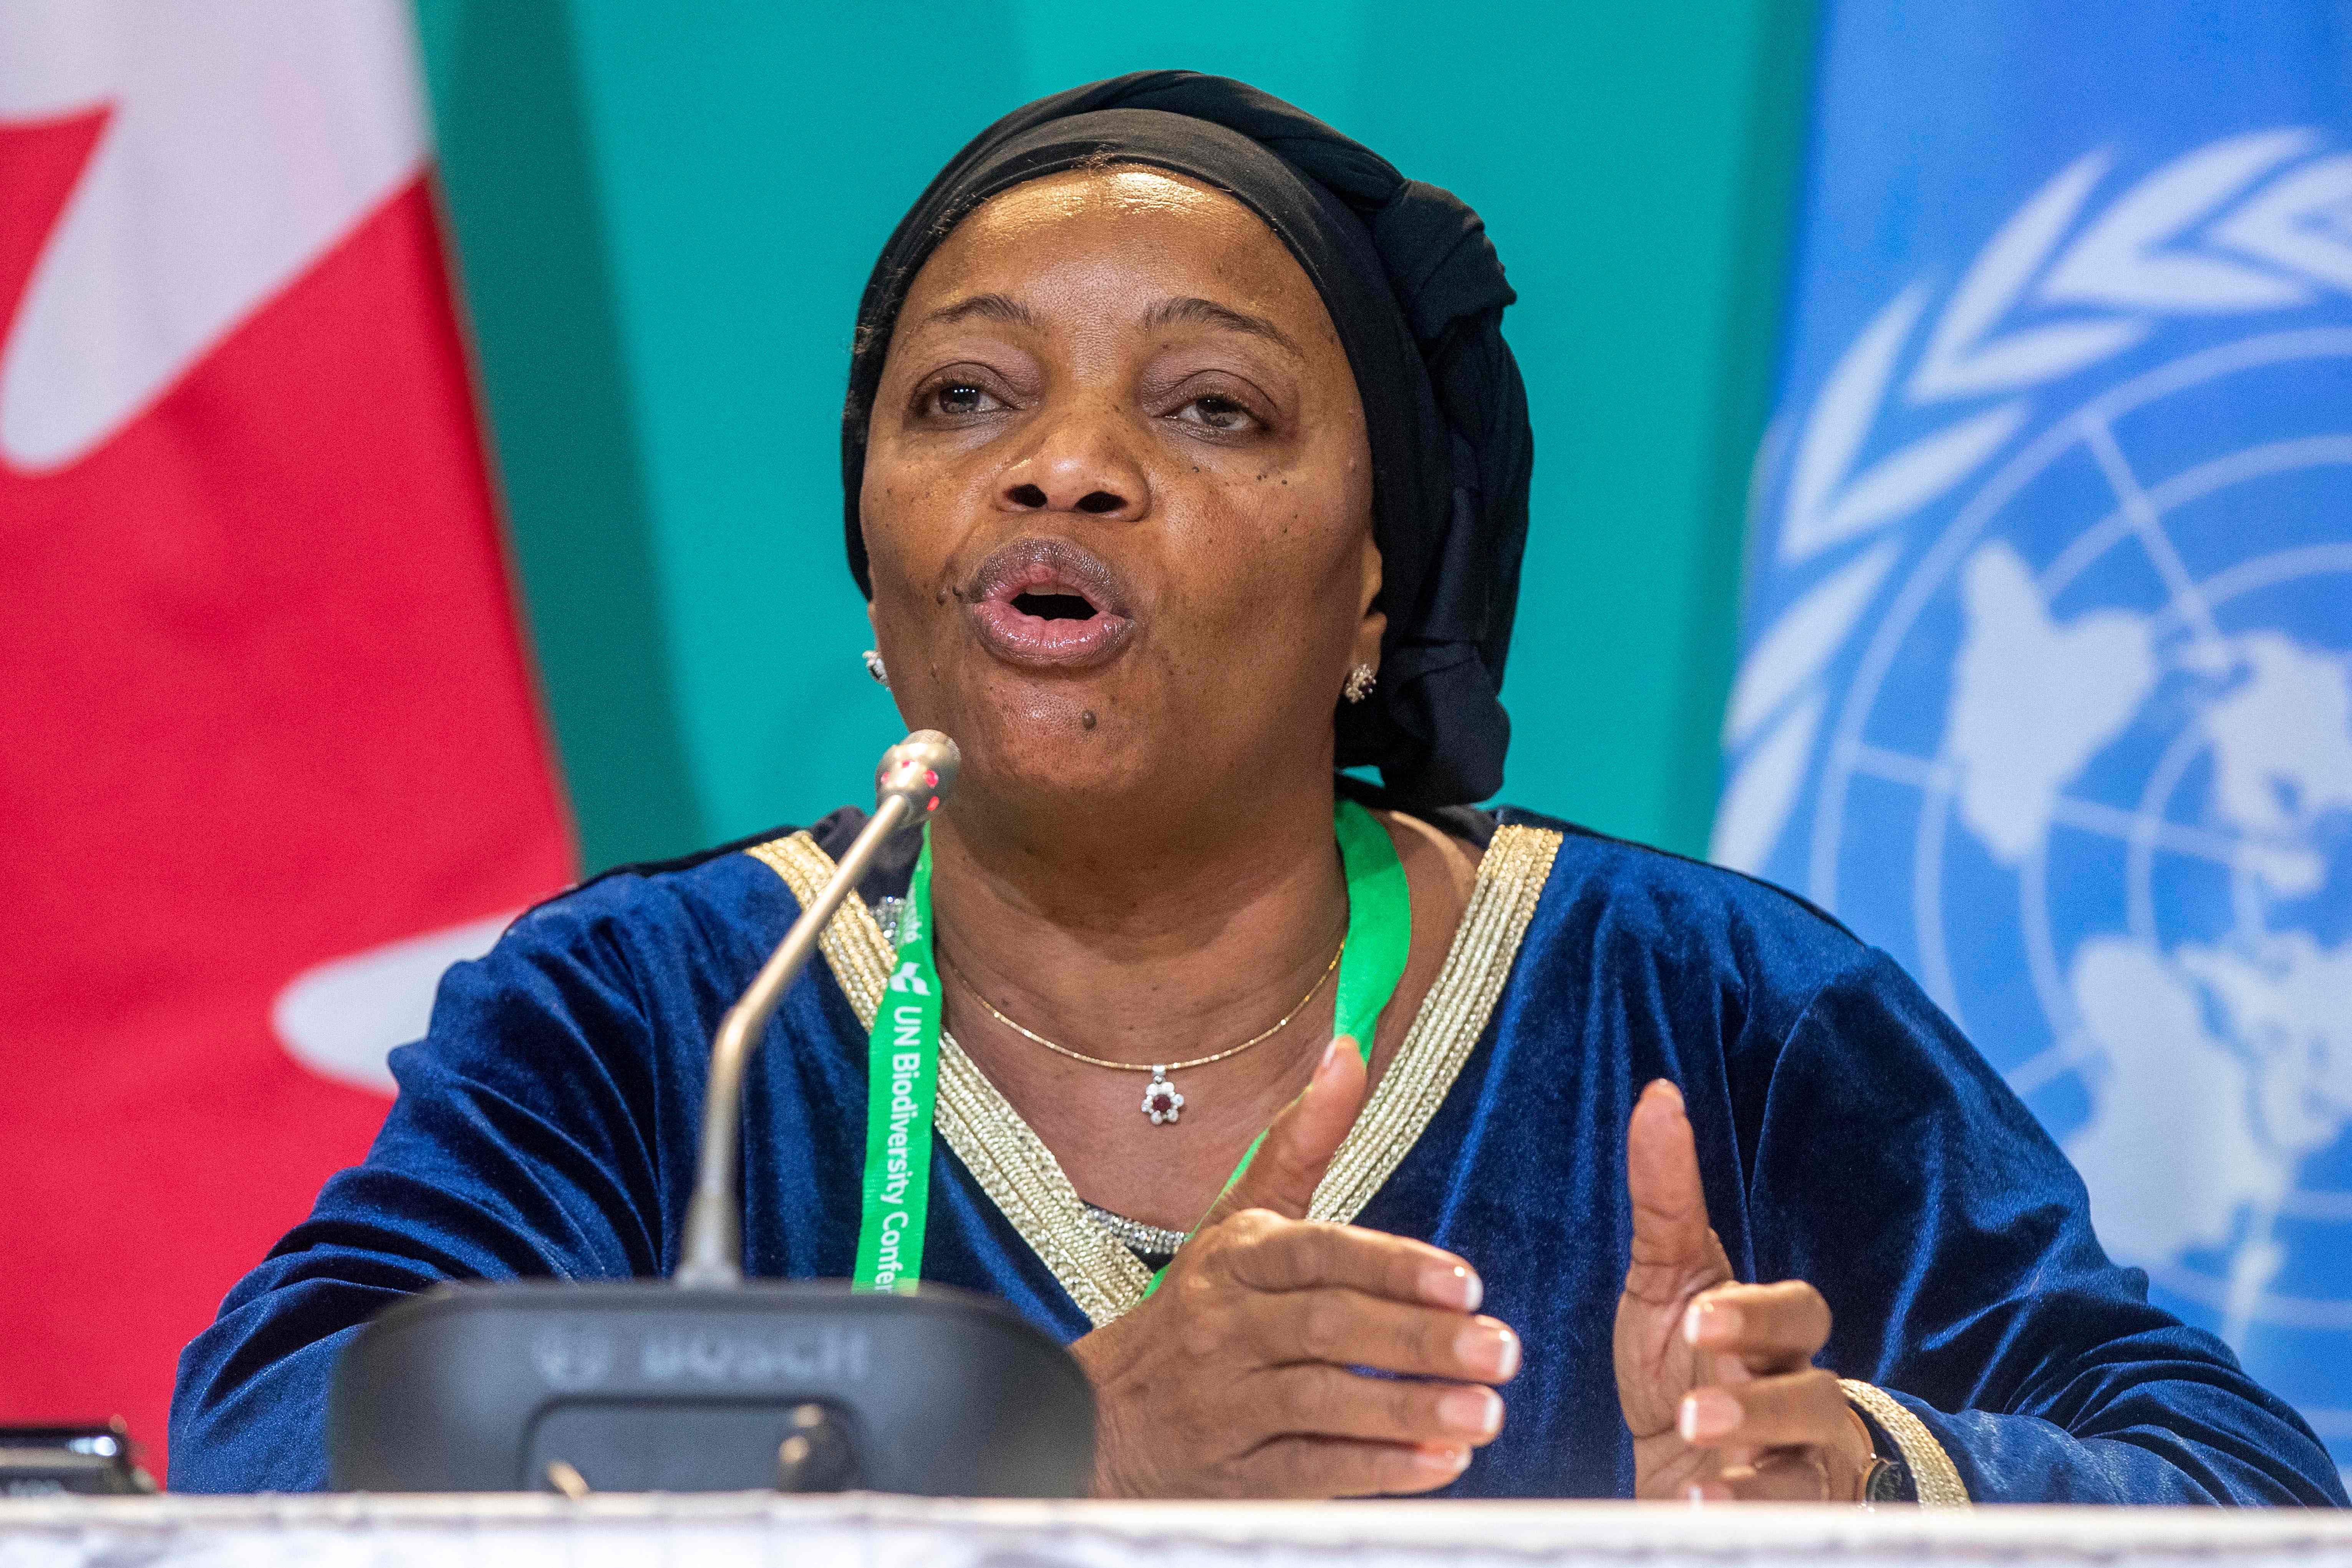 Eve Bazaiba holds a press conference during the UN Biodiversity Conference